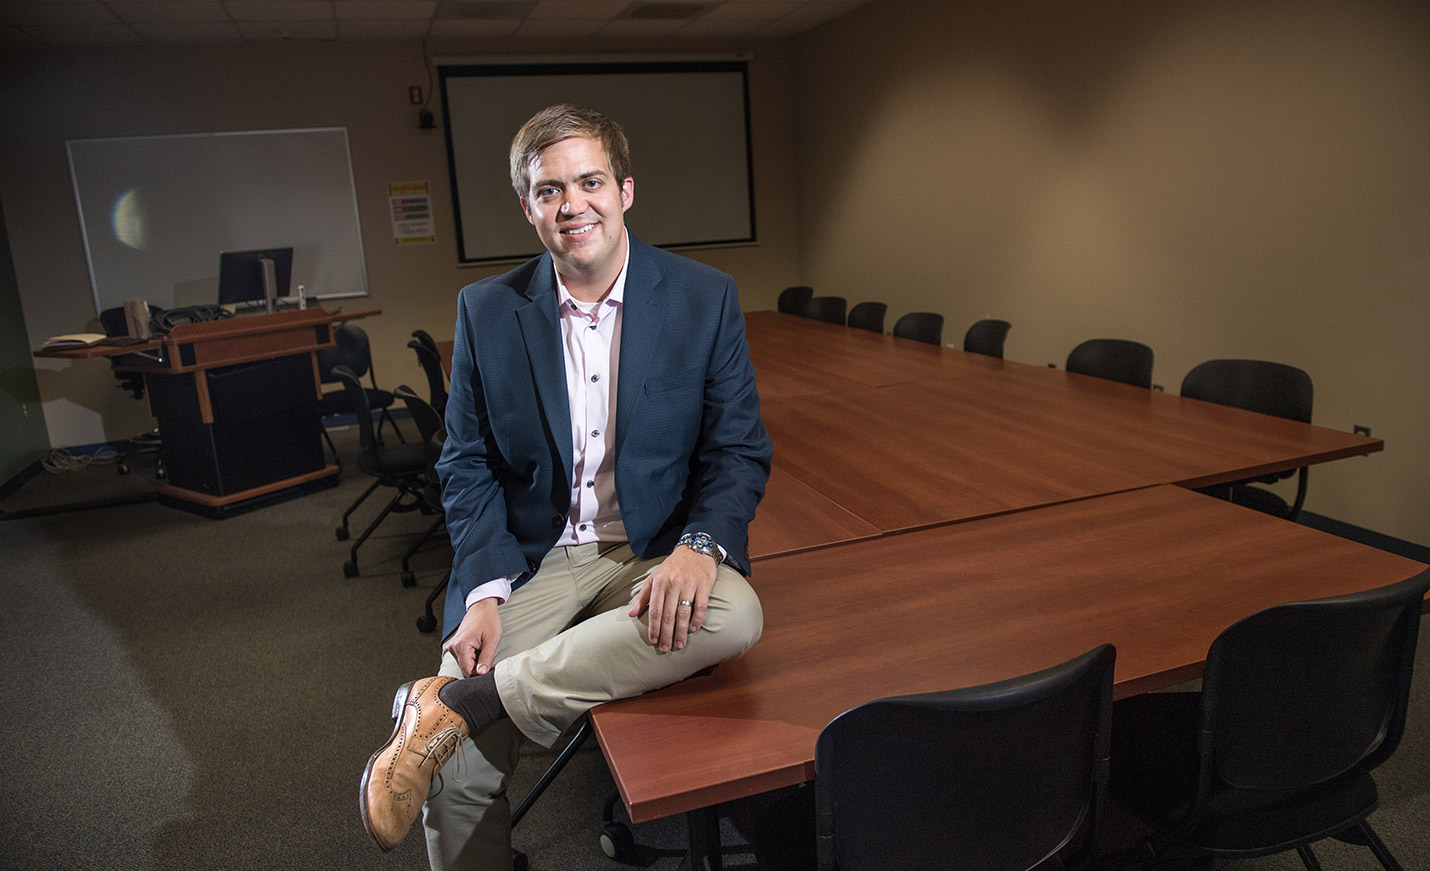 UNCW Associate Professor Aaron King sits against a table in a classroom